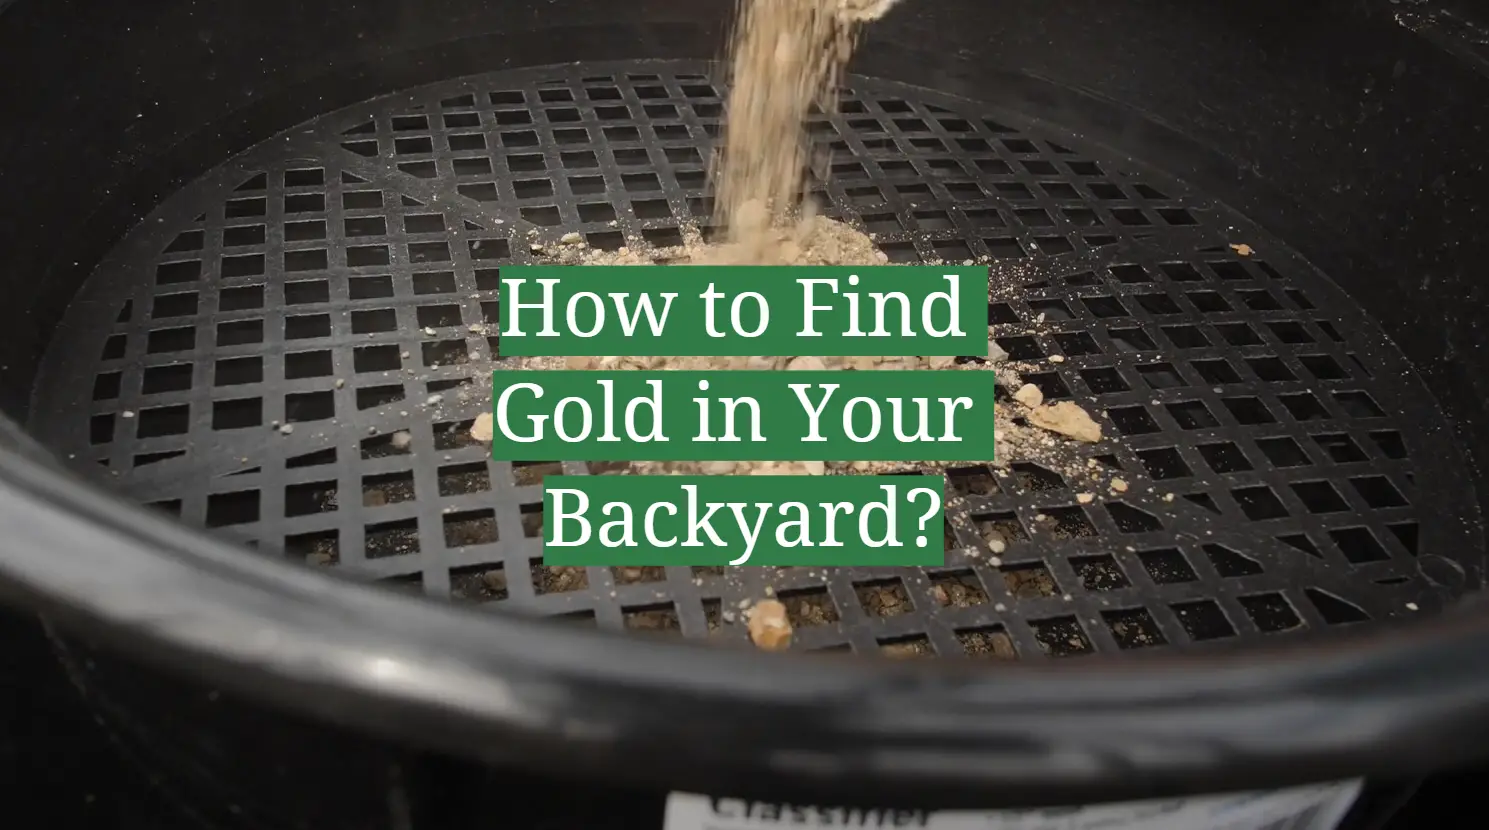 How to Find Gold in Your Backyard?